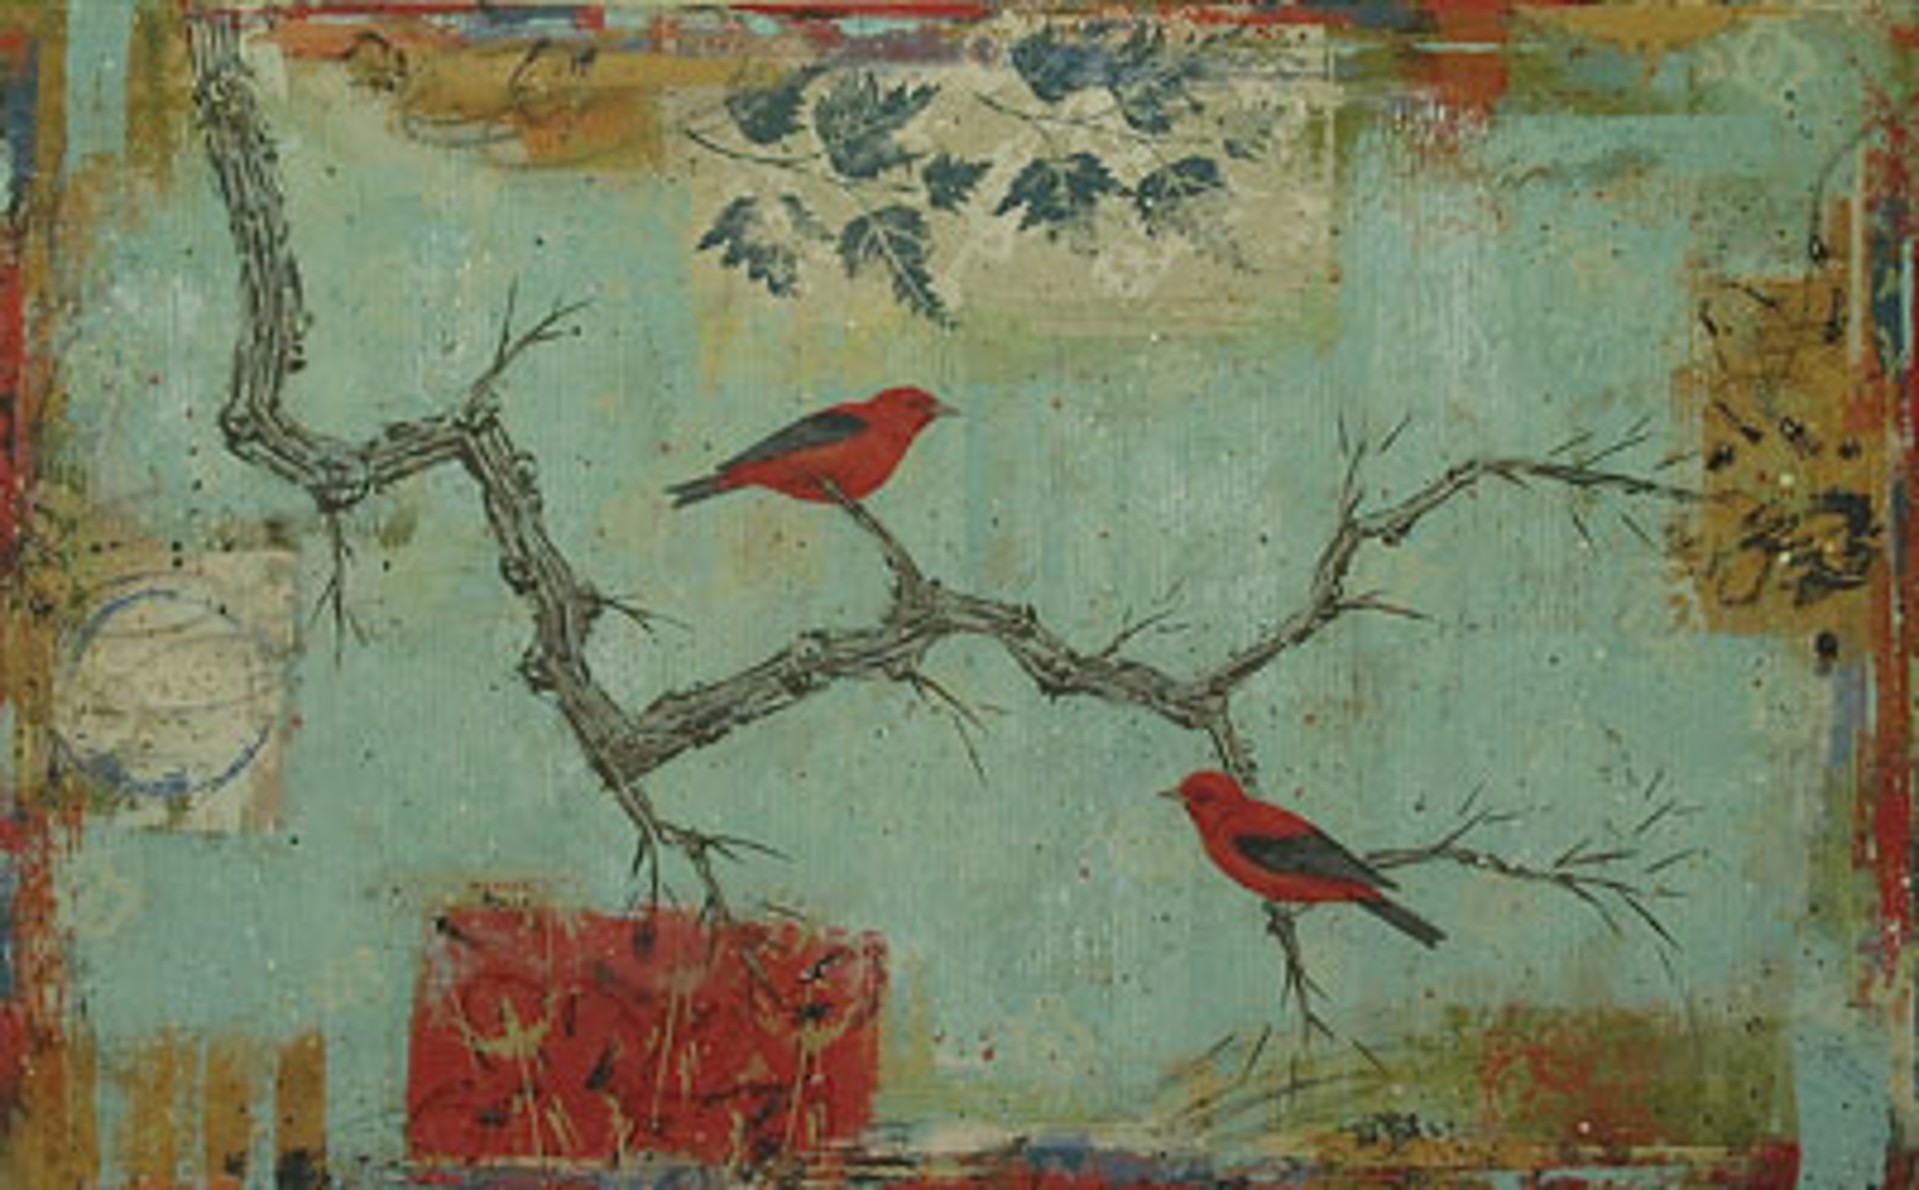 Scarlet Tanagers (#4) by Paul Brigham